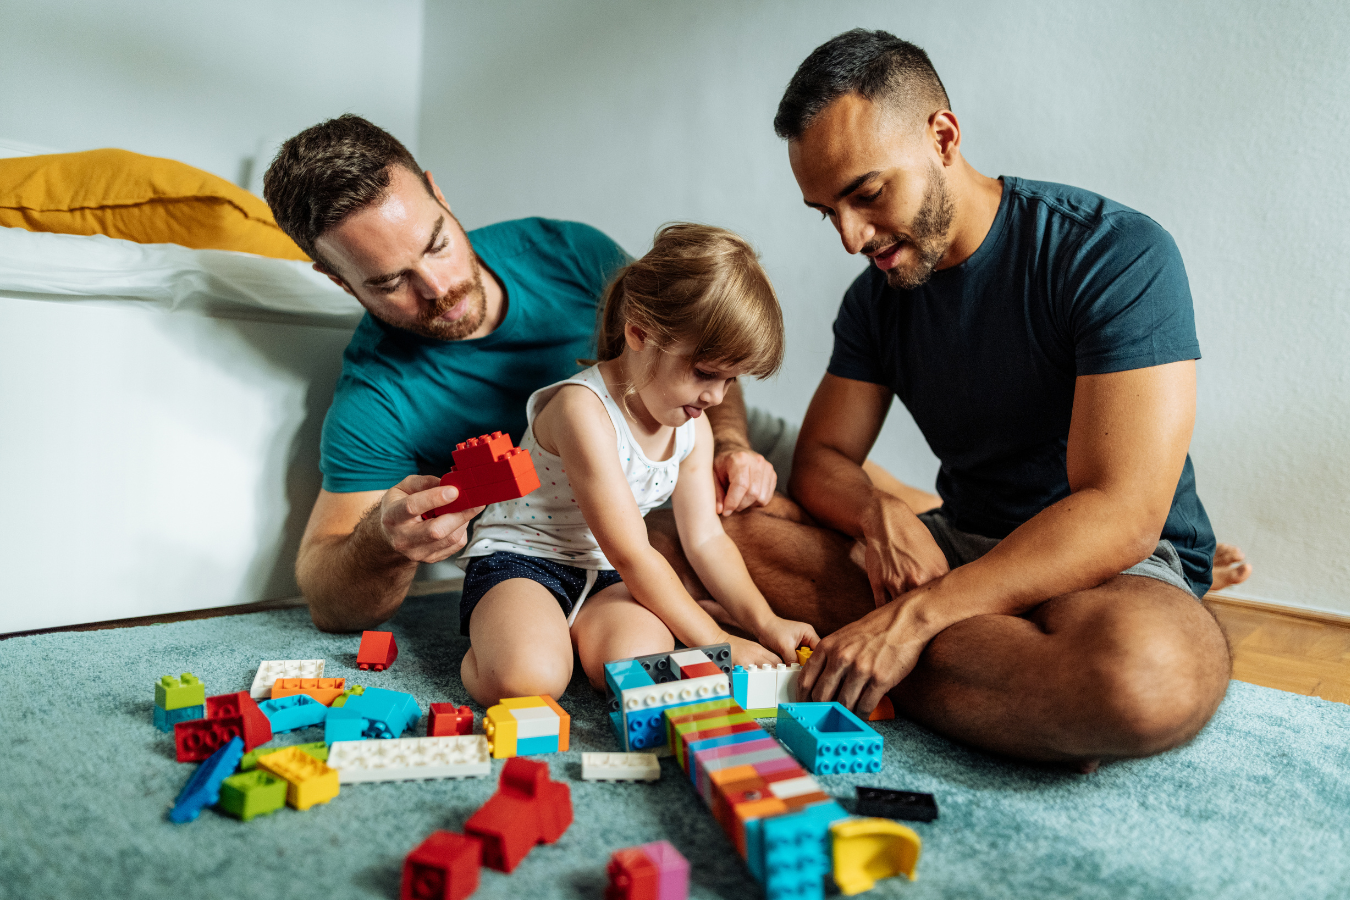 Two Dads play blocks with their adopted daughter. Sparkrock's ERP can help facilitate the adoption process by bridging technology and service together.